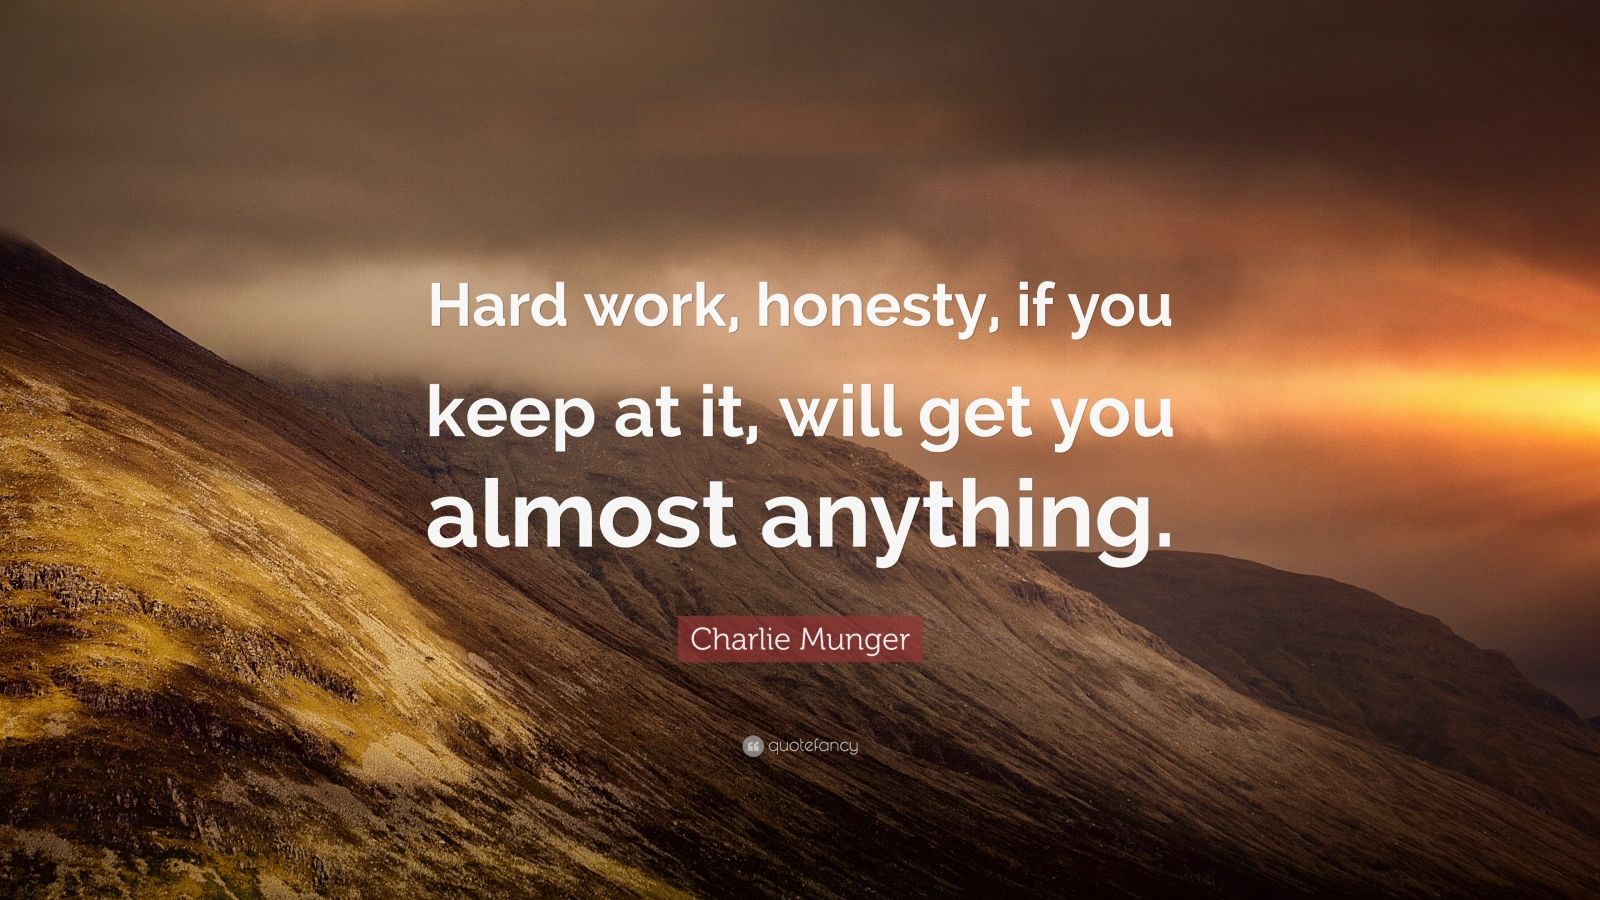 Charlie Munger Quote: “Hard work, honesty, if you keep at it, will get ...